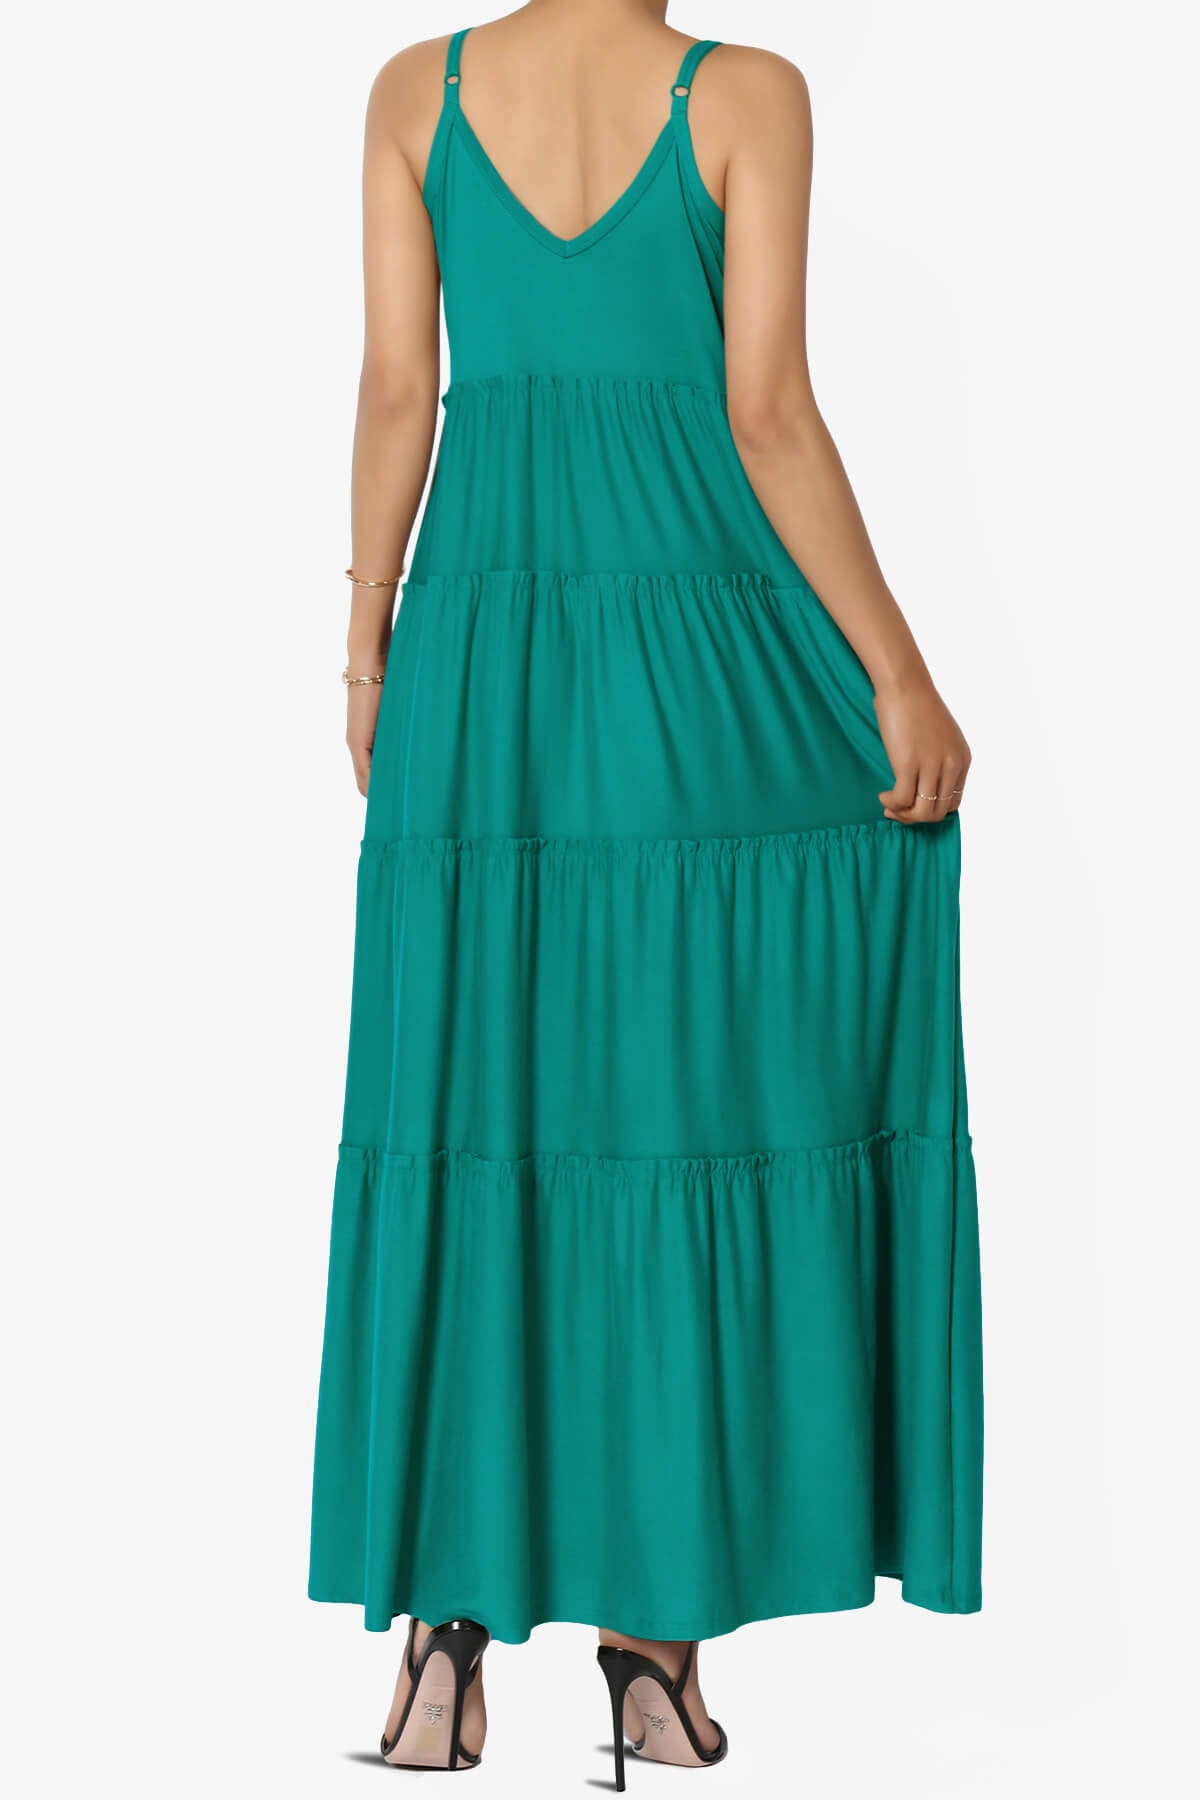 Load image into Gallery viewer, Livvy V-Neck Tiered Cami Maxi Dress LT TEAL_2
